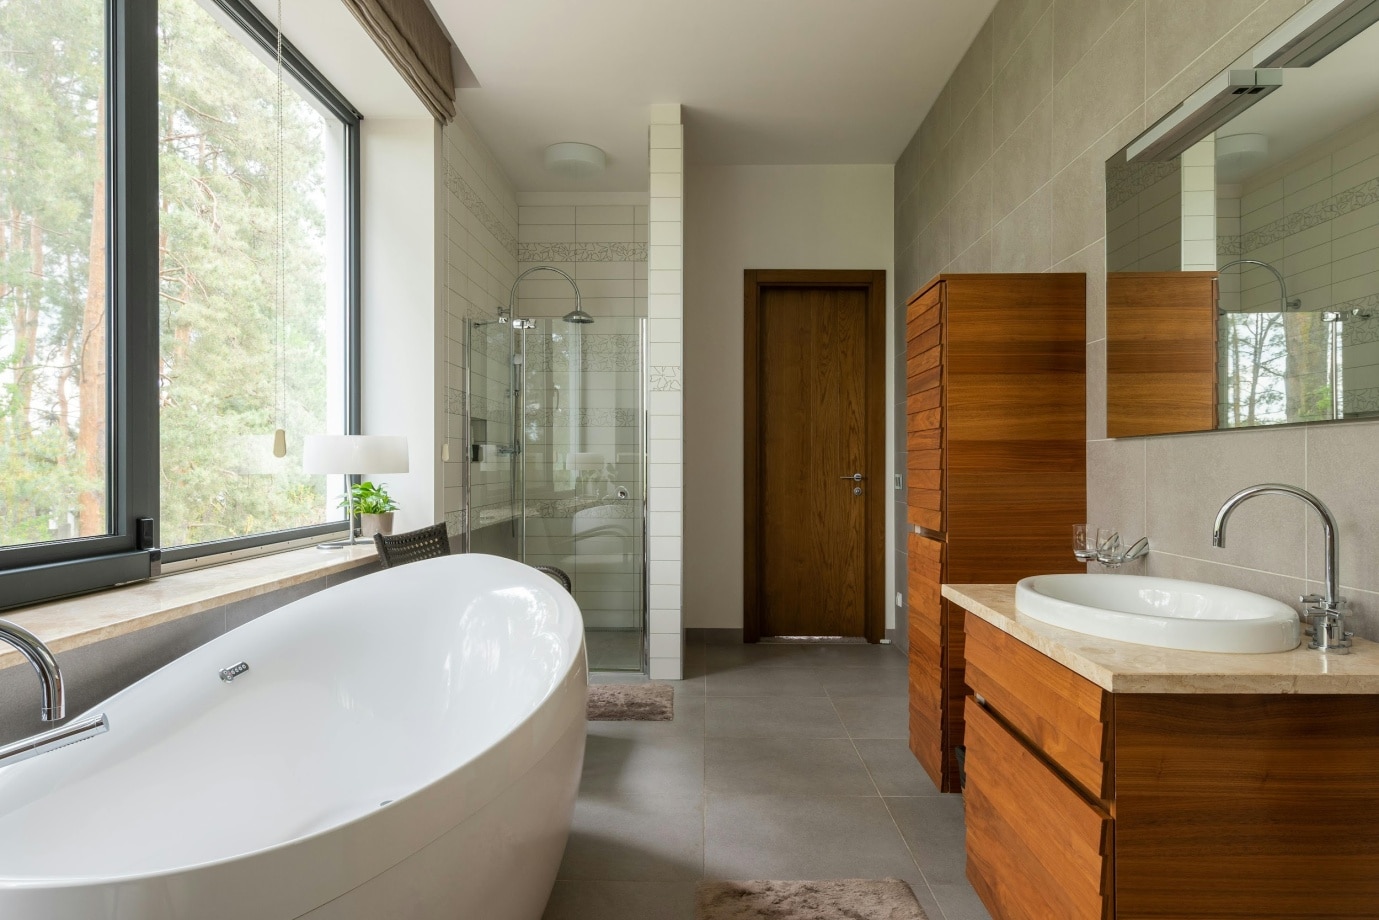 Top 7 Common Mistakes in Bathroom Renovations and How to Avoid Them